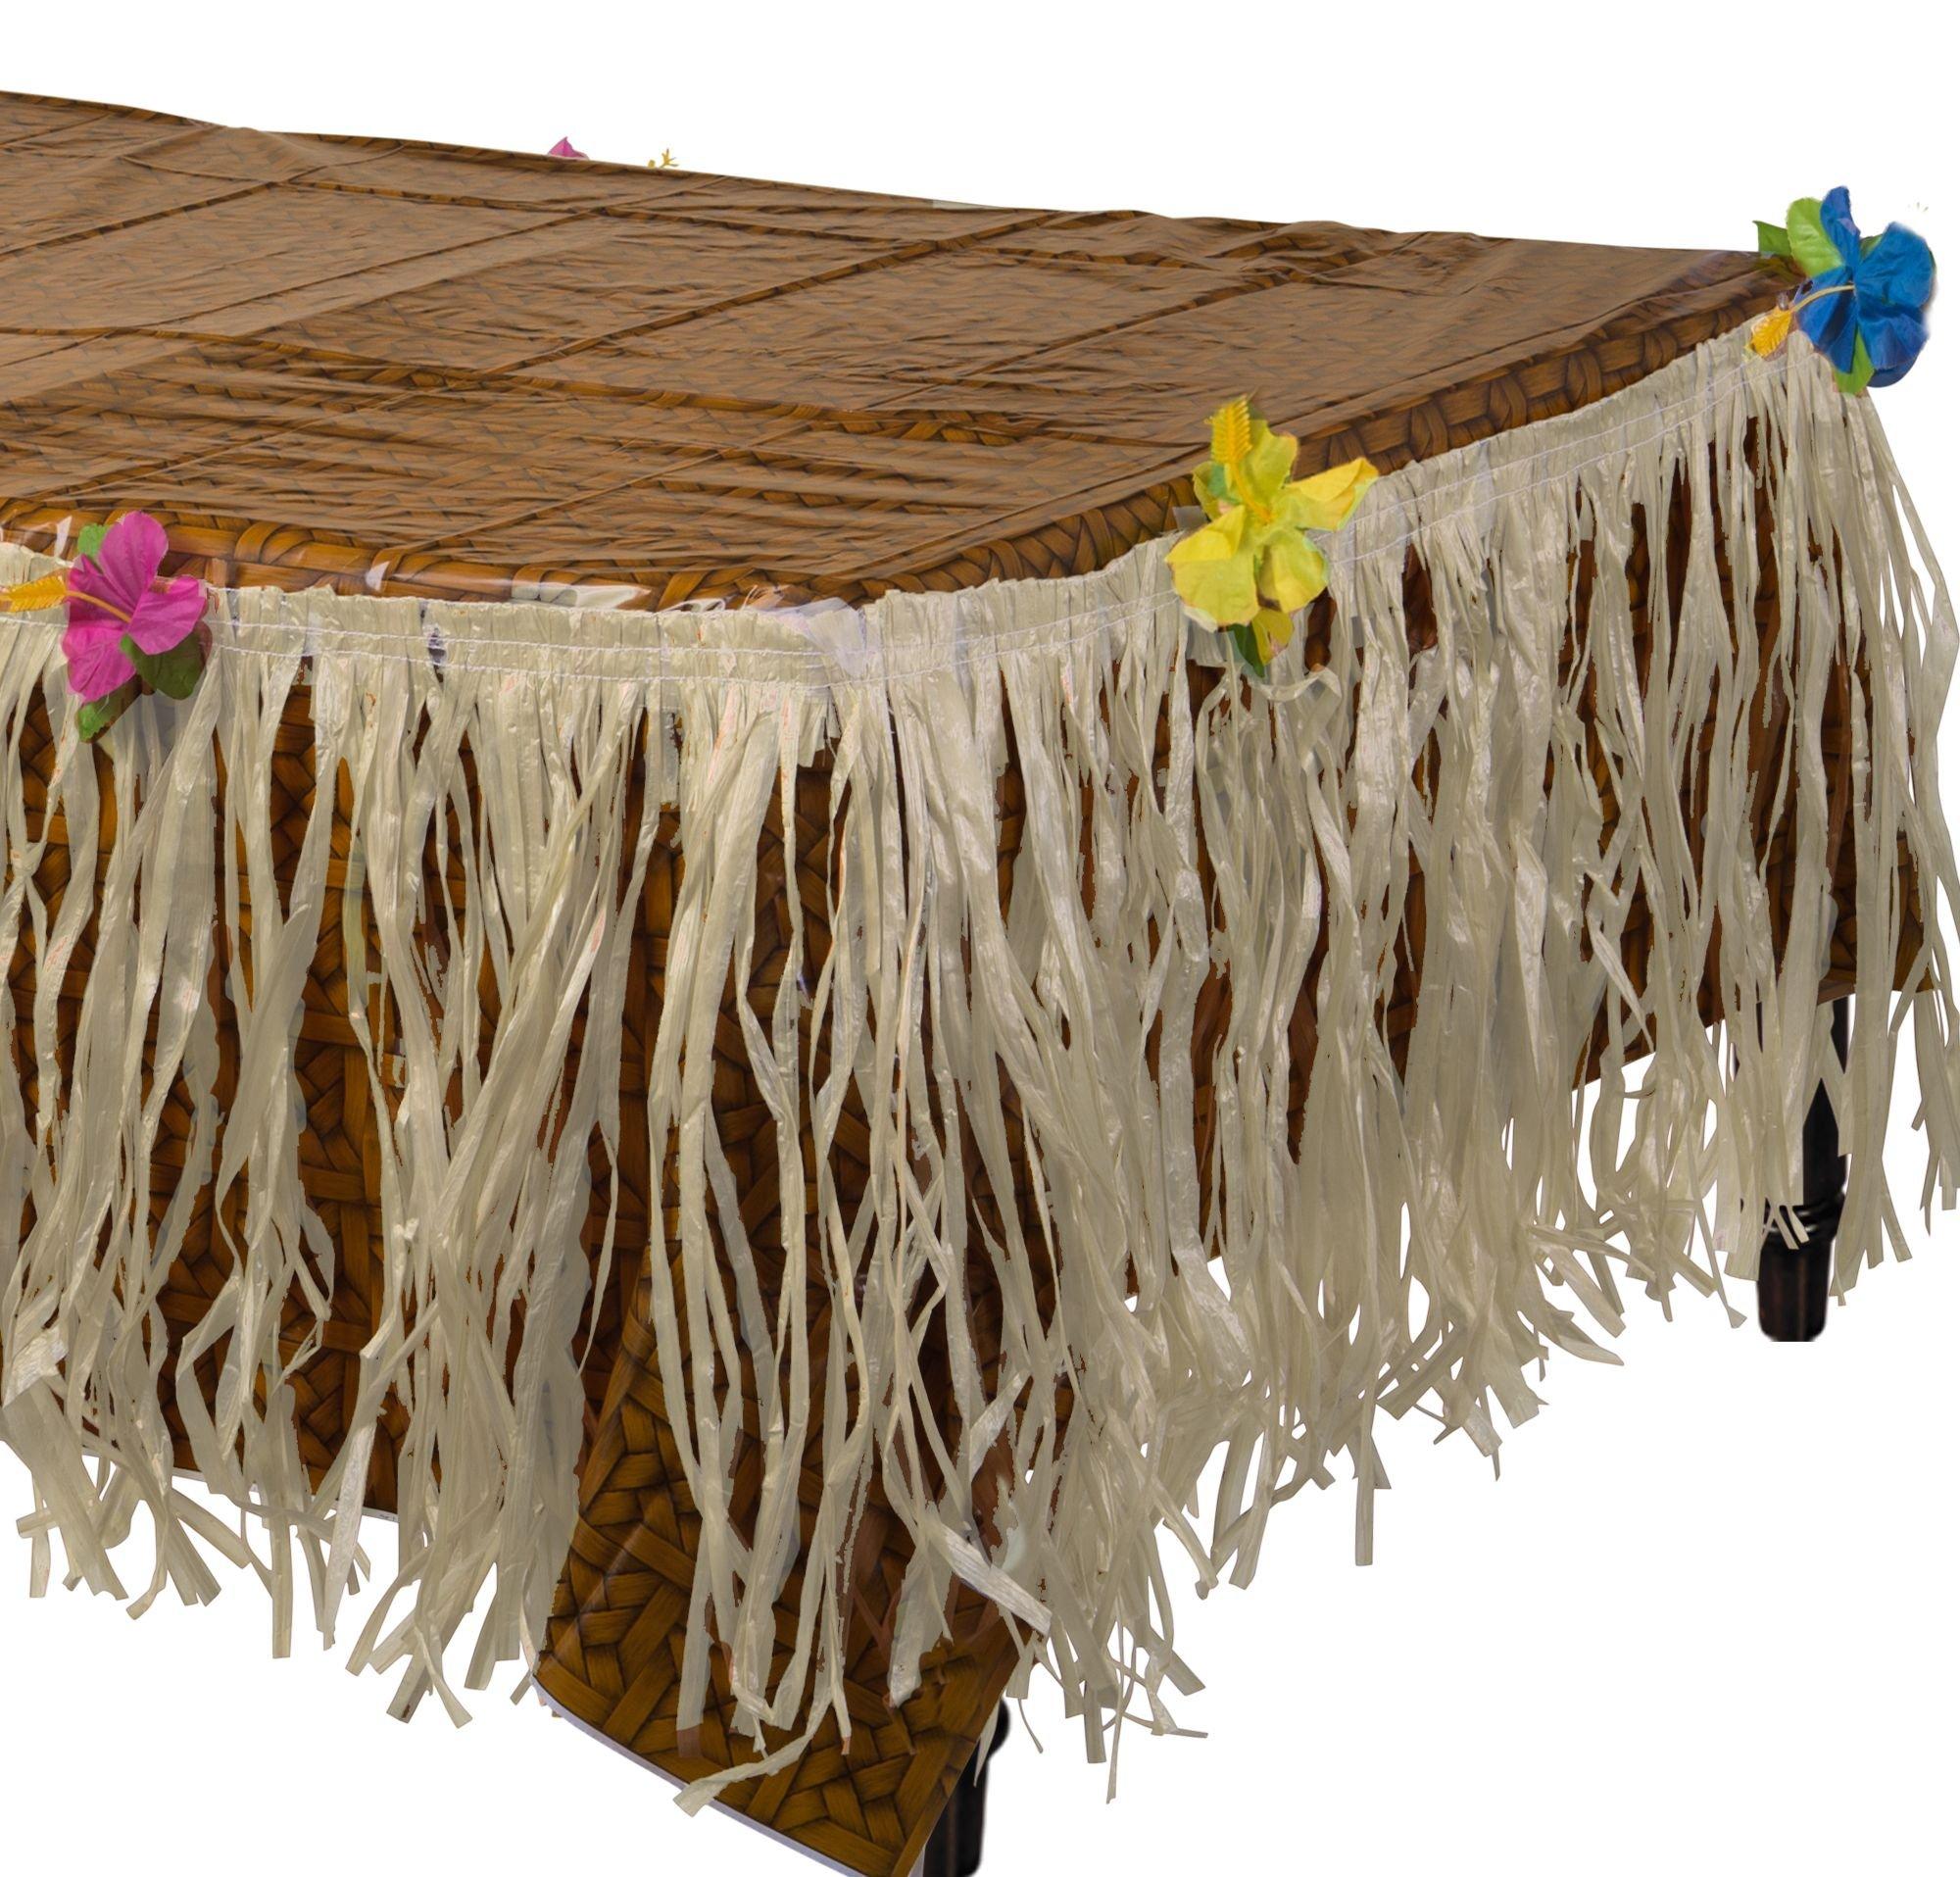 Faux Woven Luau Plastic Table Cover & Tan Raffia Grass Fringe Table Skirt with Flowers Set